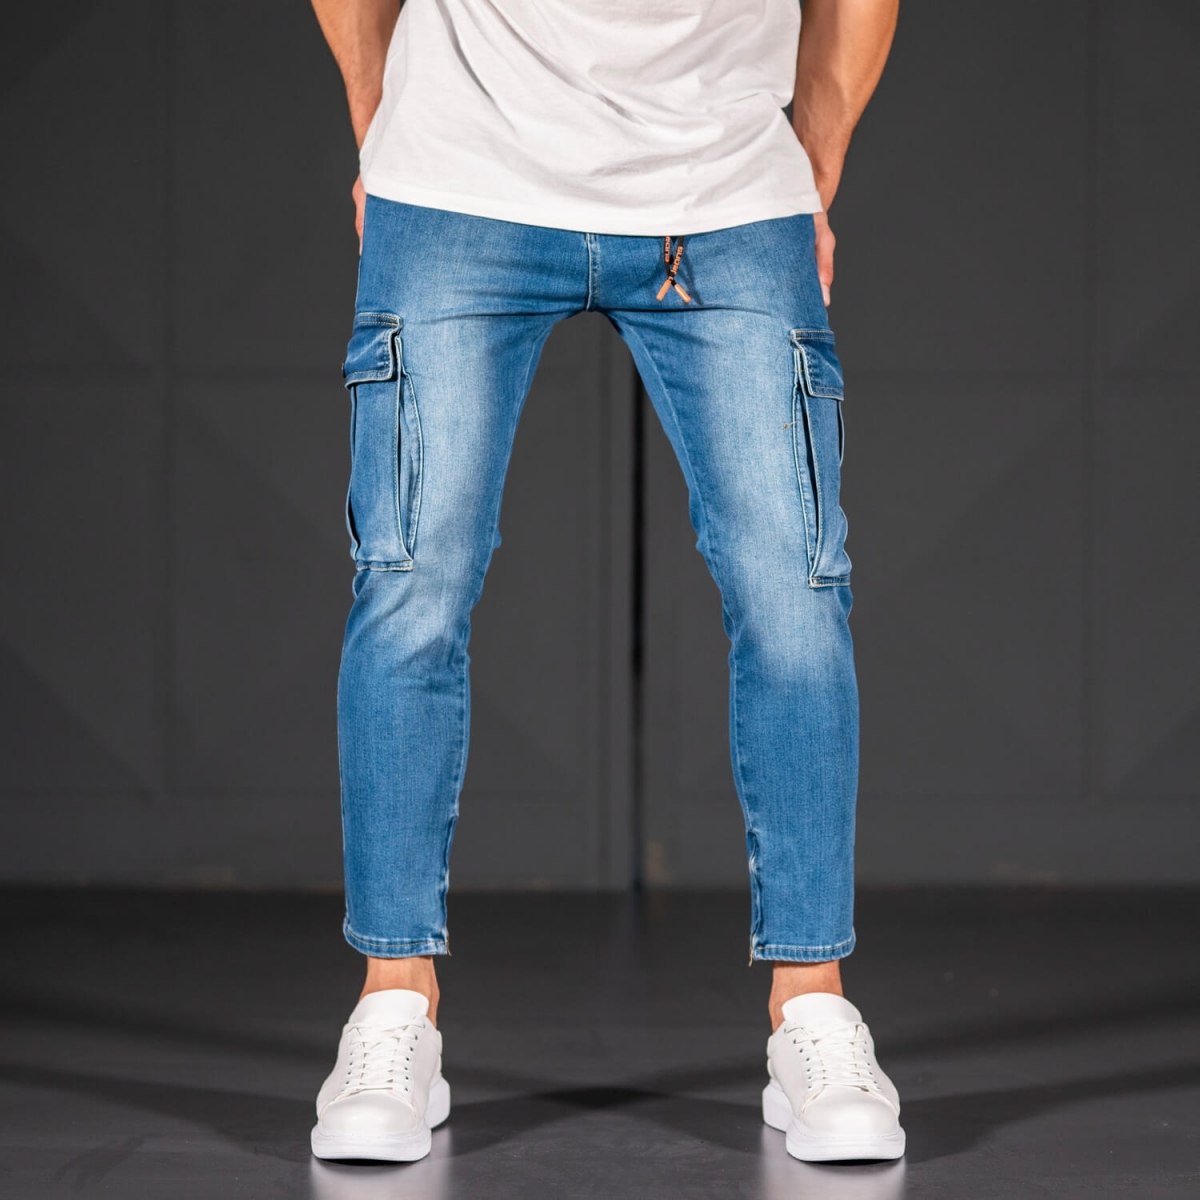 Men's Jeans with Pockets Style in Ocean Blue - 1